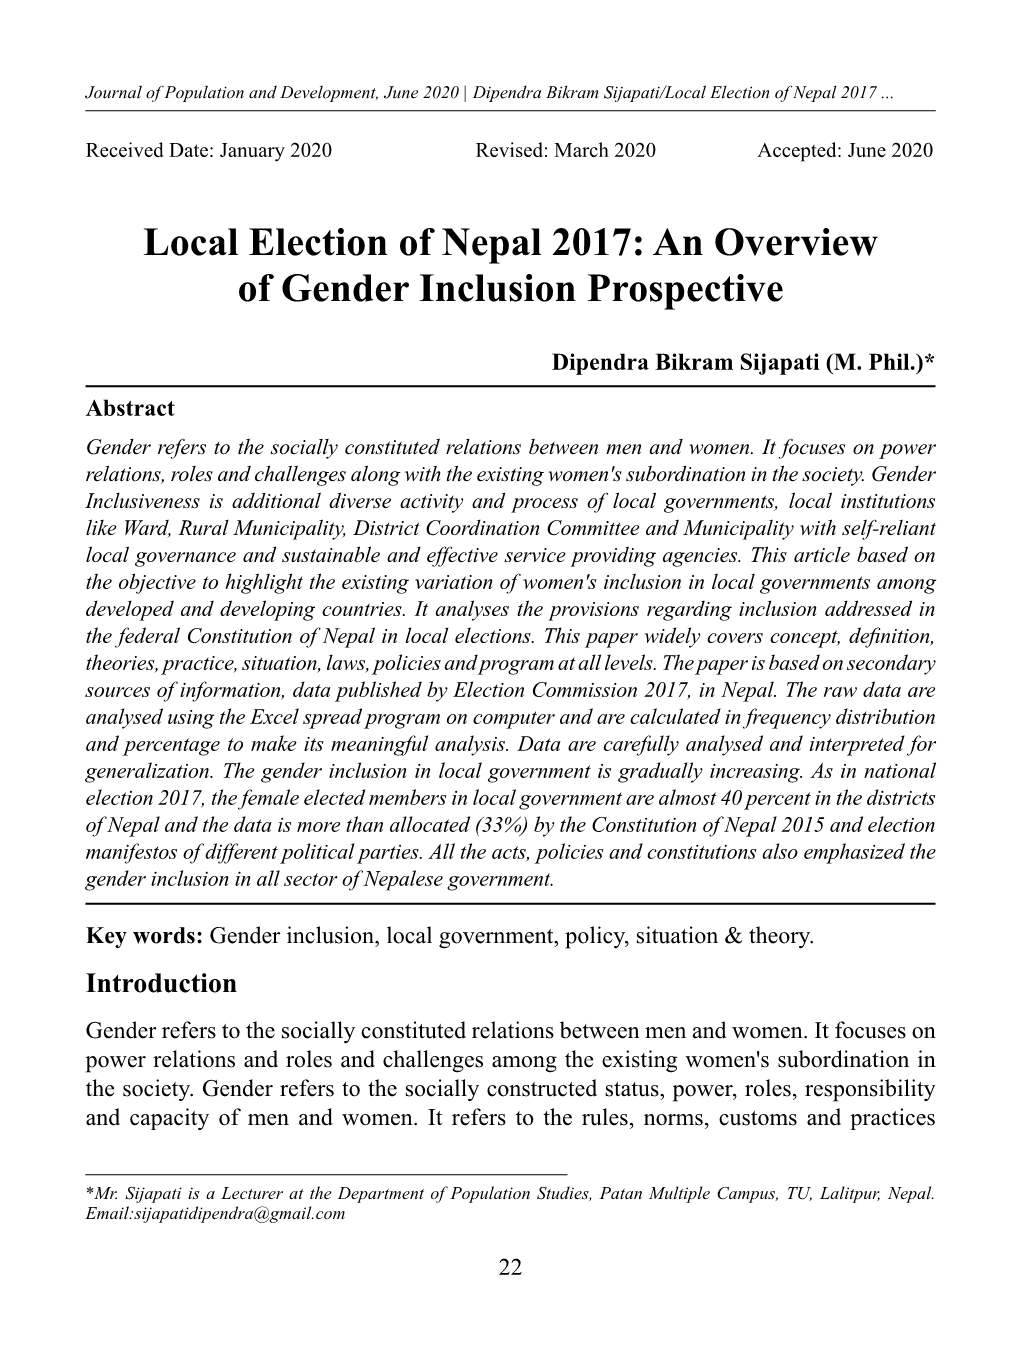 Local Election of Nepal 2017